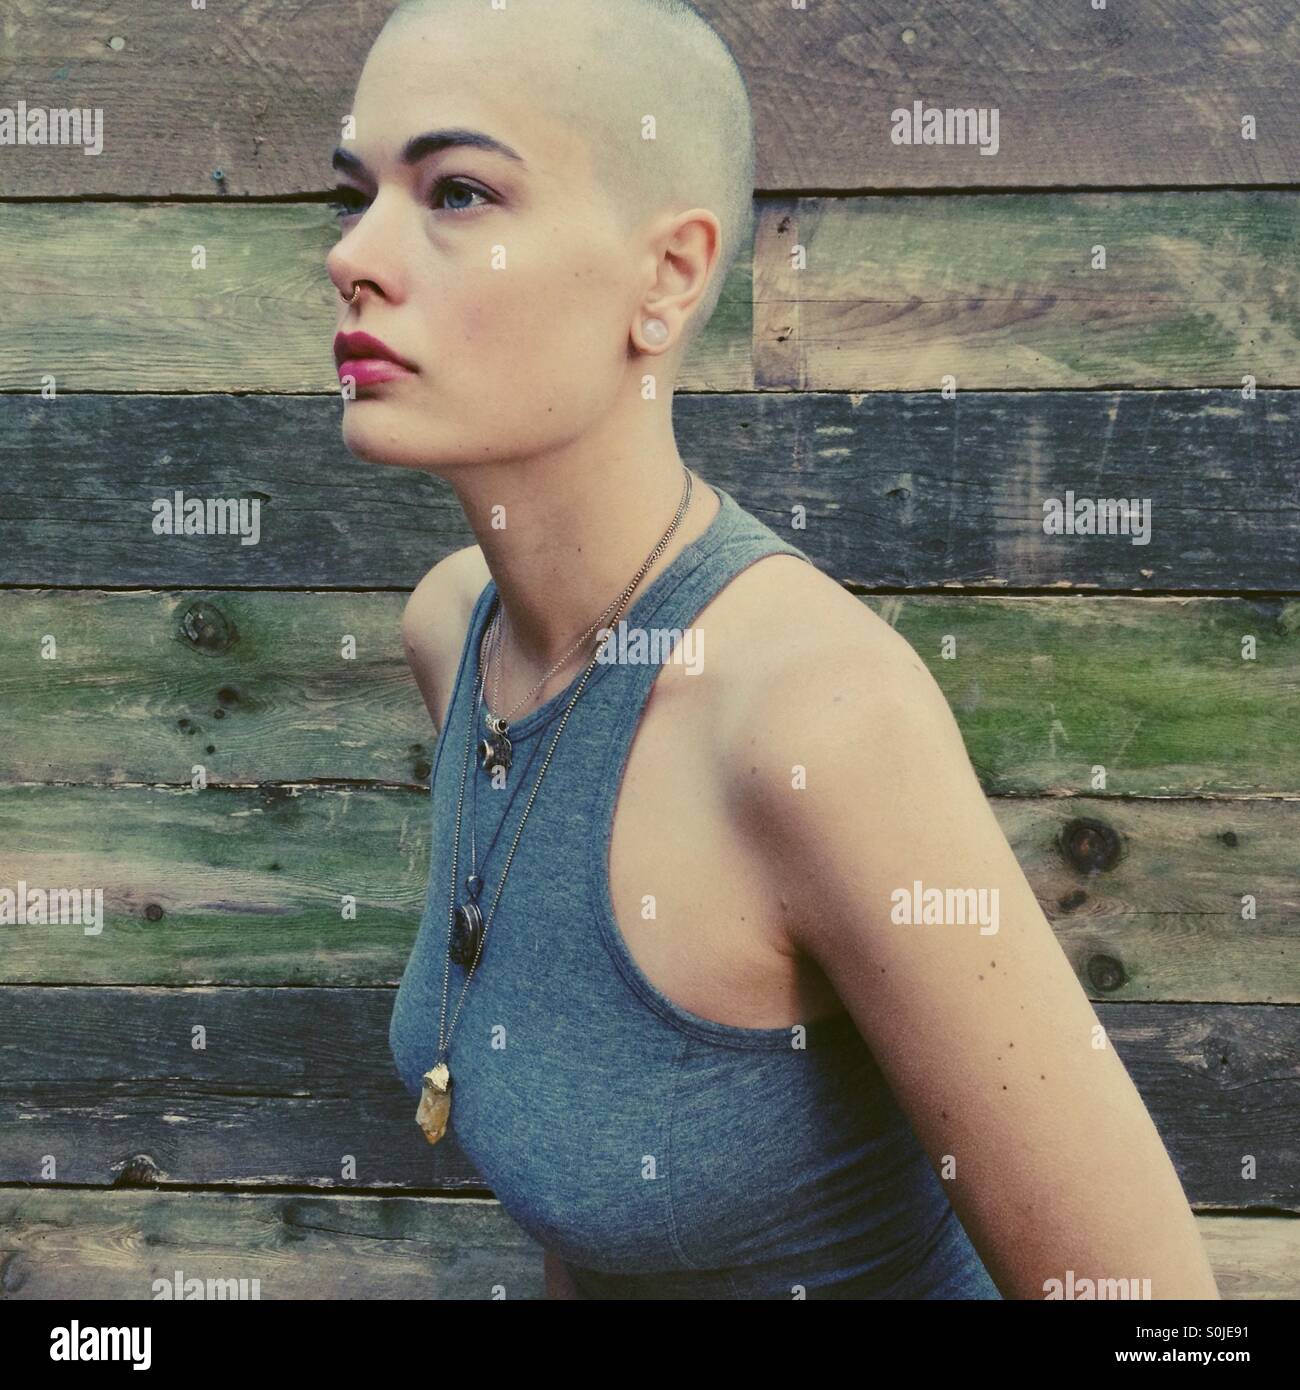 Bald woman with shaved head posing in front of wood background. Stock Photo